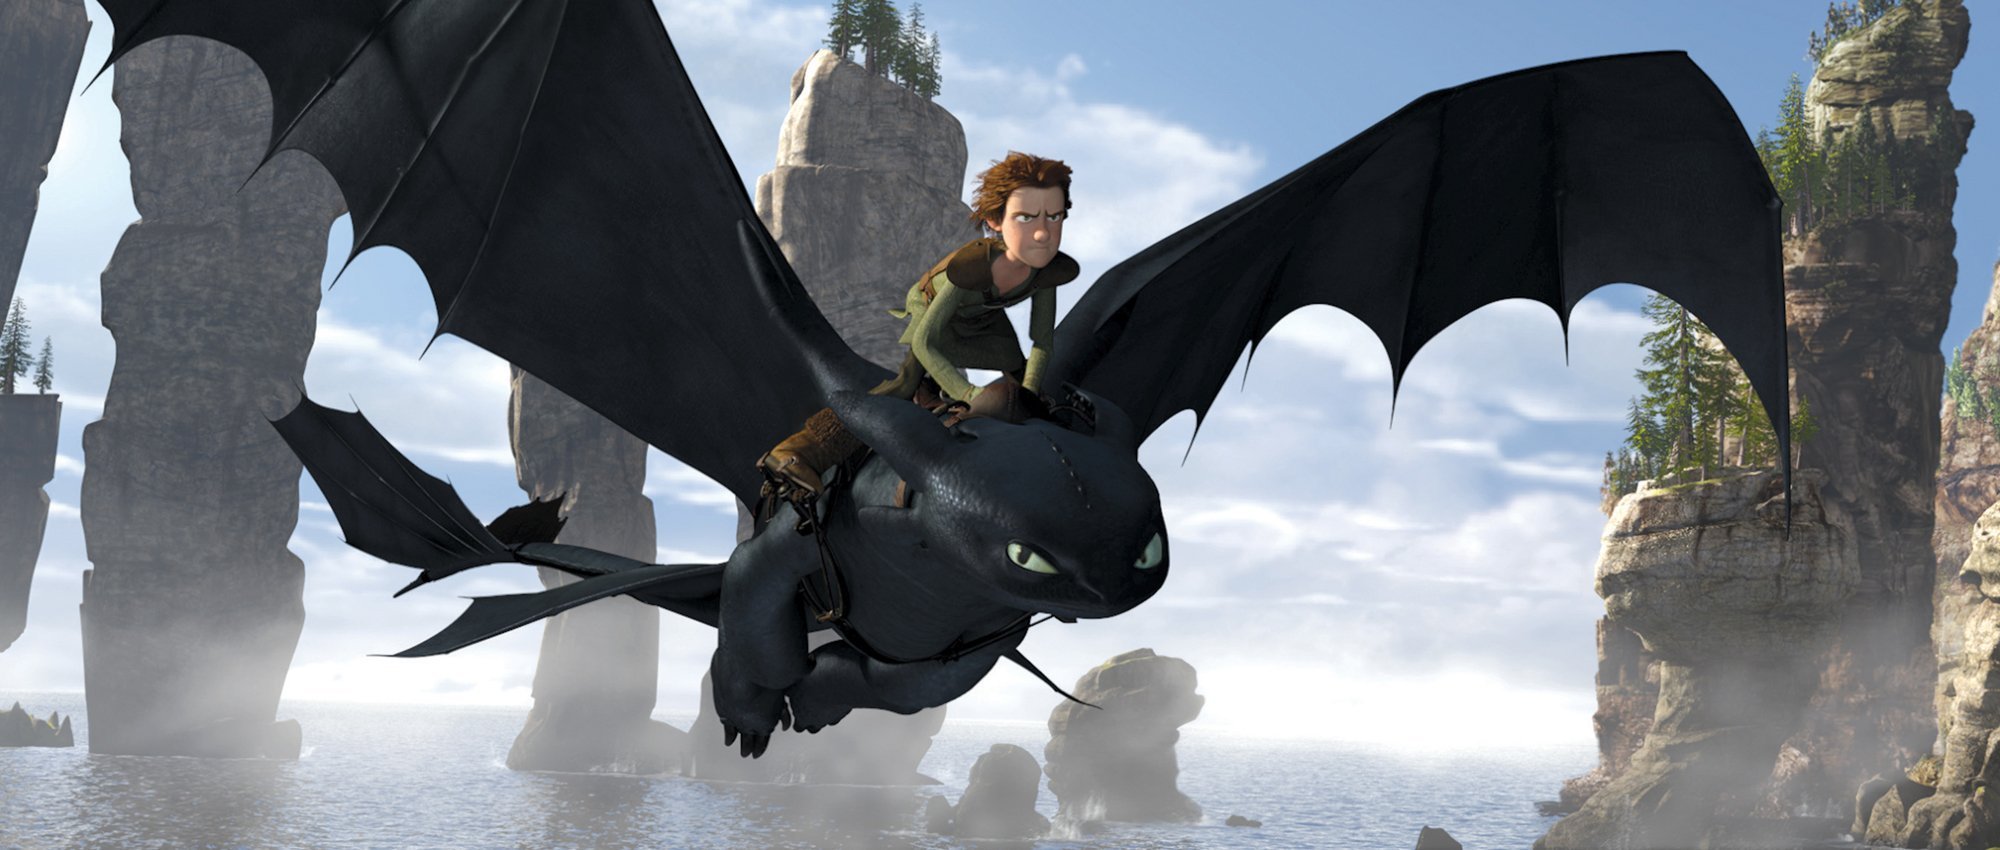 Hiccup-Toothless-how-to-train-your-dragon-9626230-2000-850